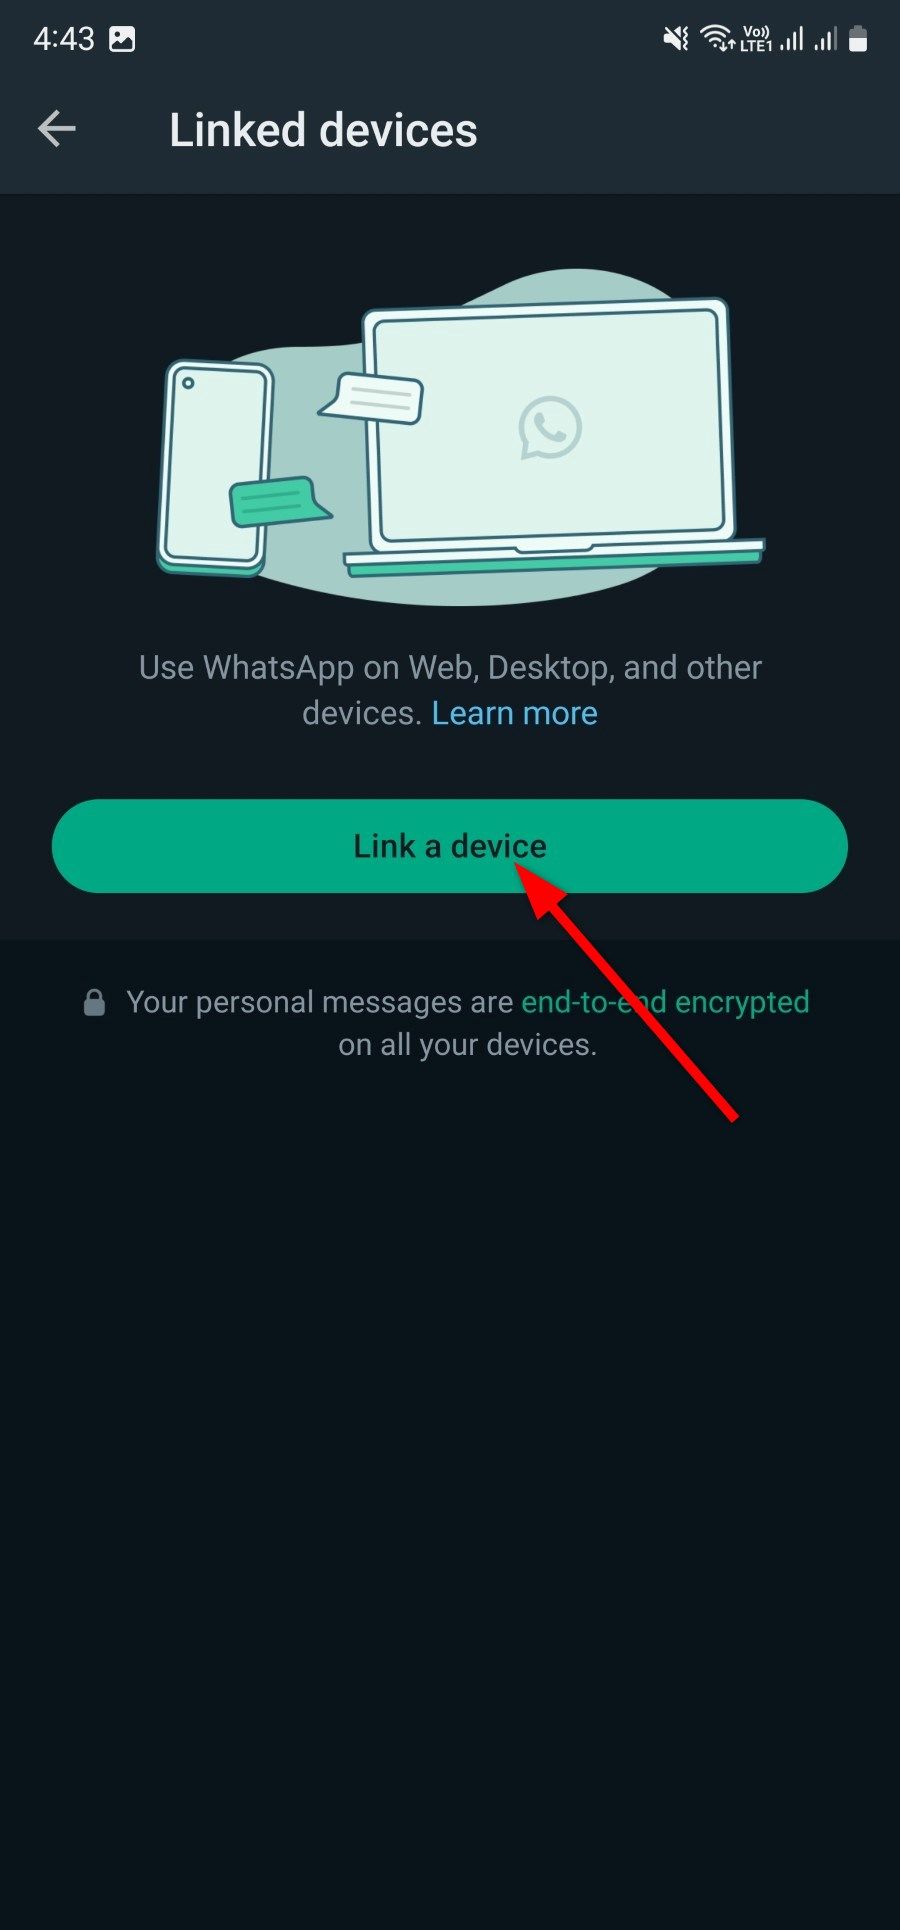 Screenshot showing how to link a device in WhatsApp